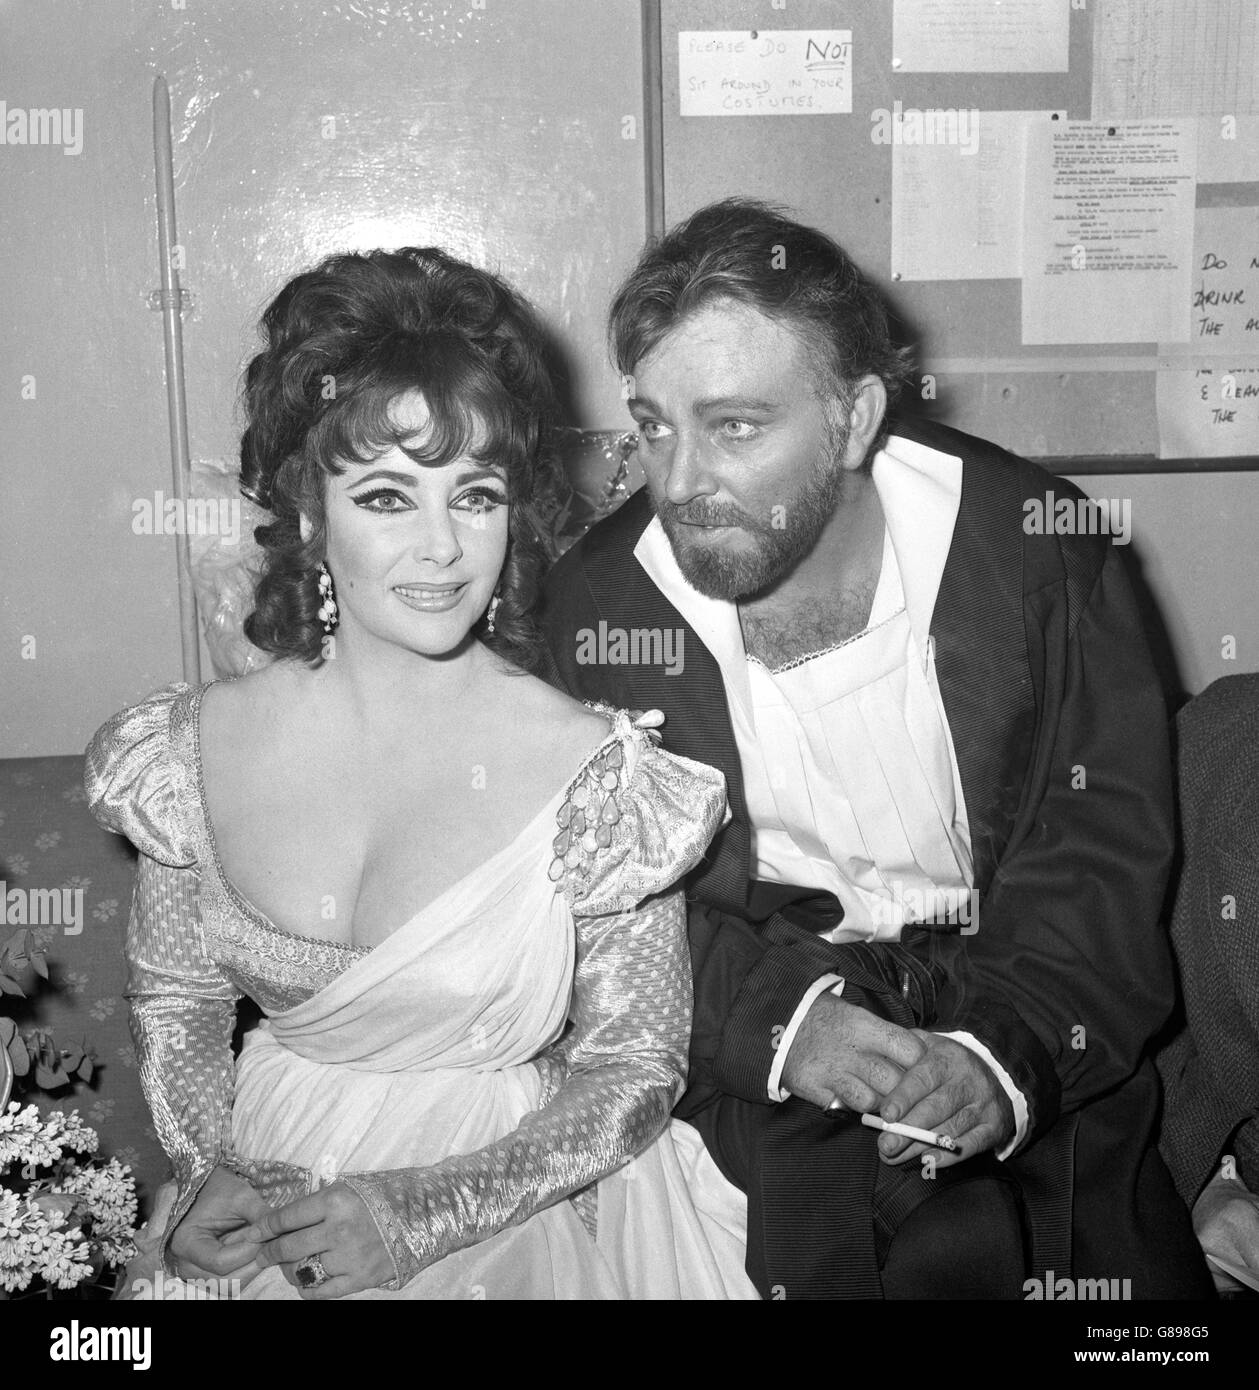 Elizabeth Taylor and Richard Burton after appearing in the first night of the Oxford University Dramatic Society production of Marlowe's Dr Faustus at the Playhouse Theatre. Mr Burton played the title role and wife played the non-speaking part of Helen of Troy. When the play ended last night, the cast took 15 curtain calls and enjoyed over nine minutes of applause. Stock Photo